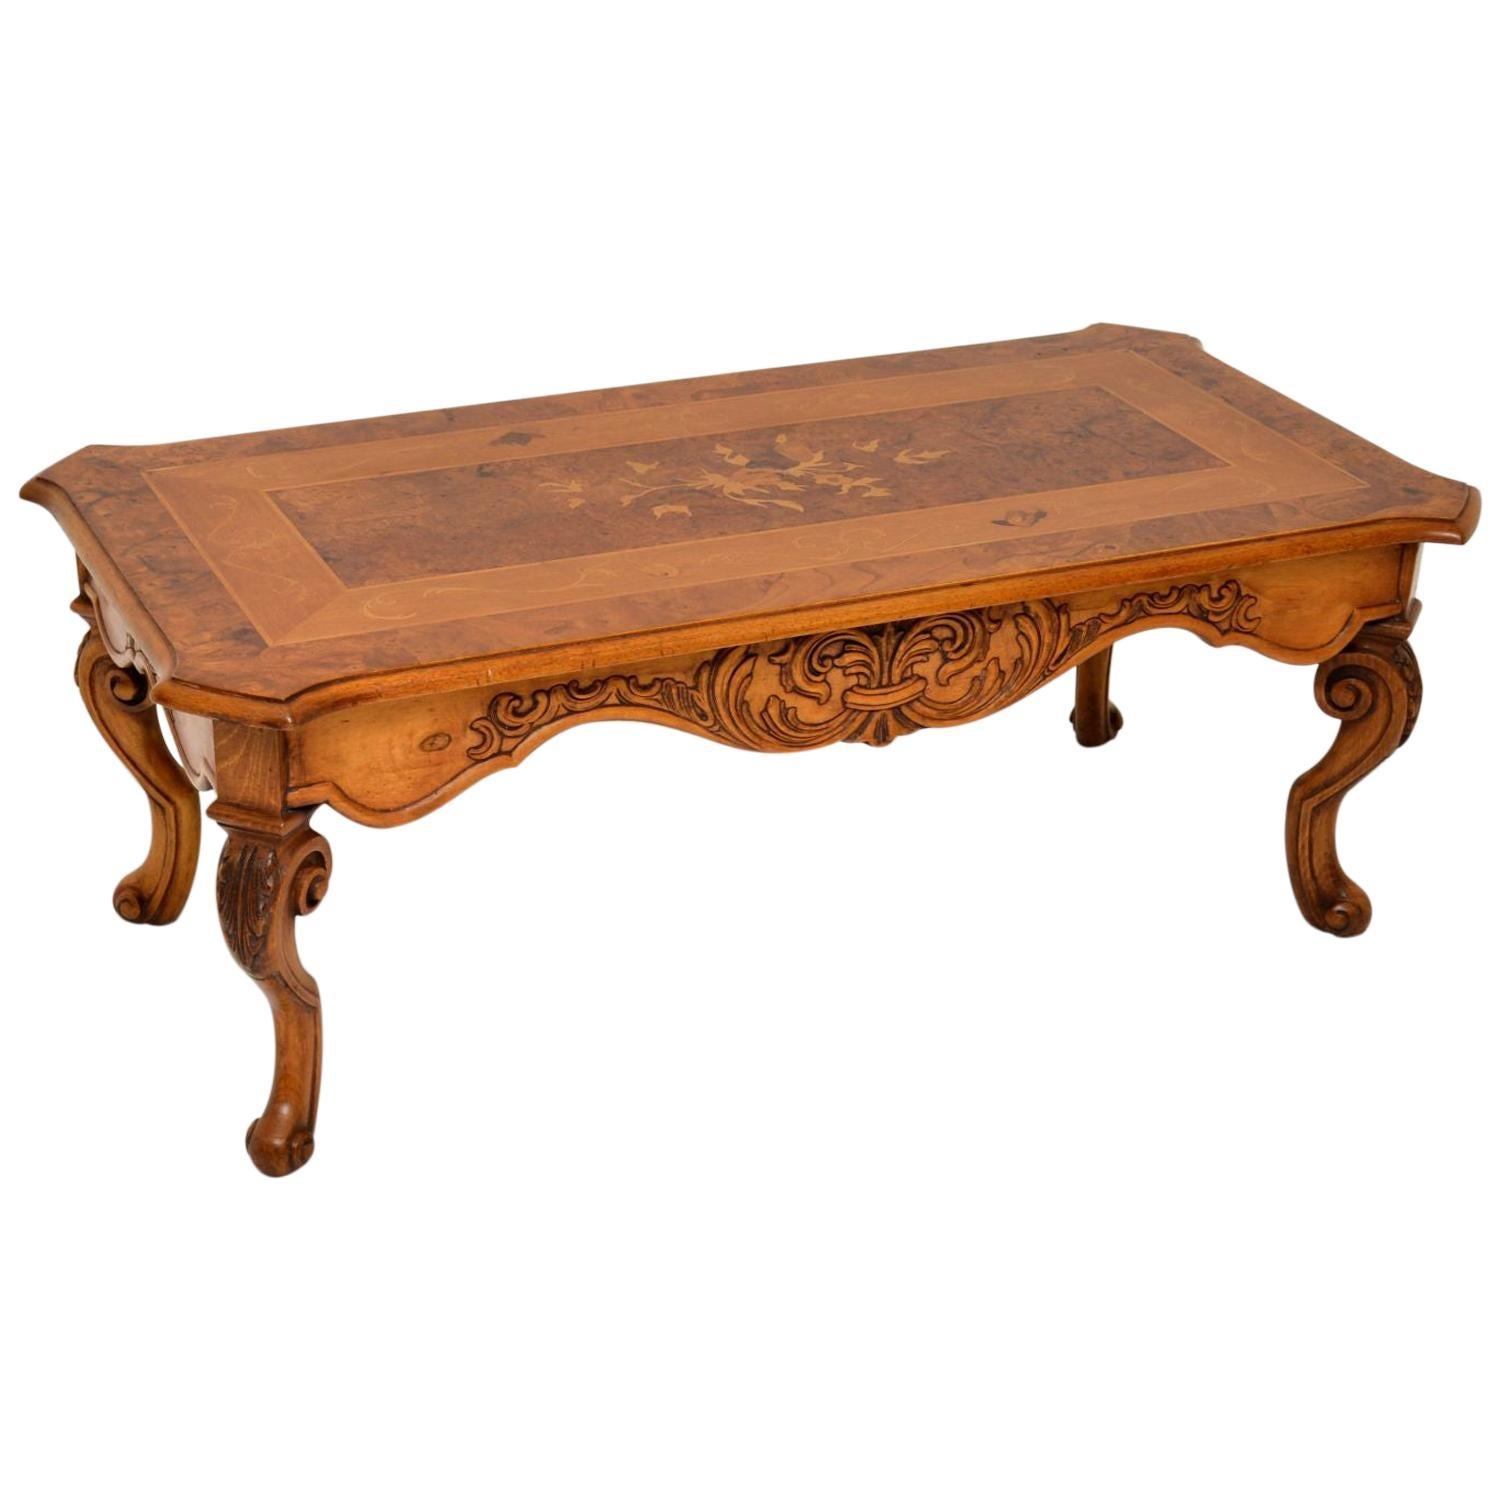 Antique French Style Burr Walnut Inlaid Marquetry Coffee Table